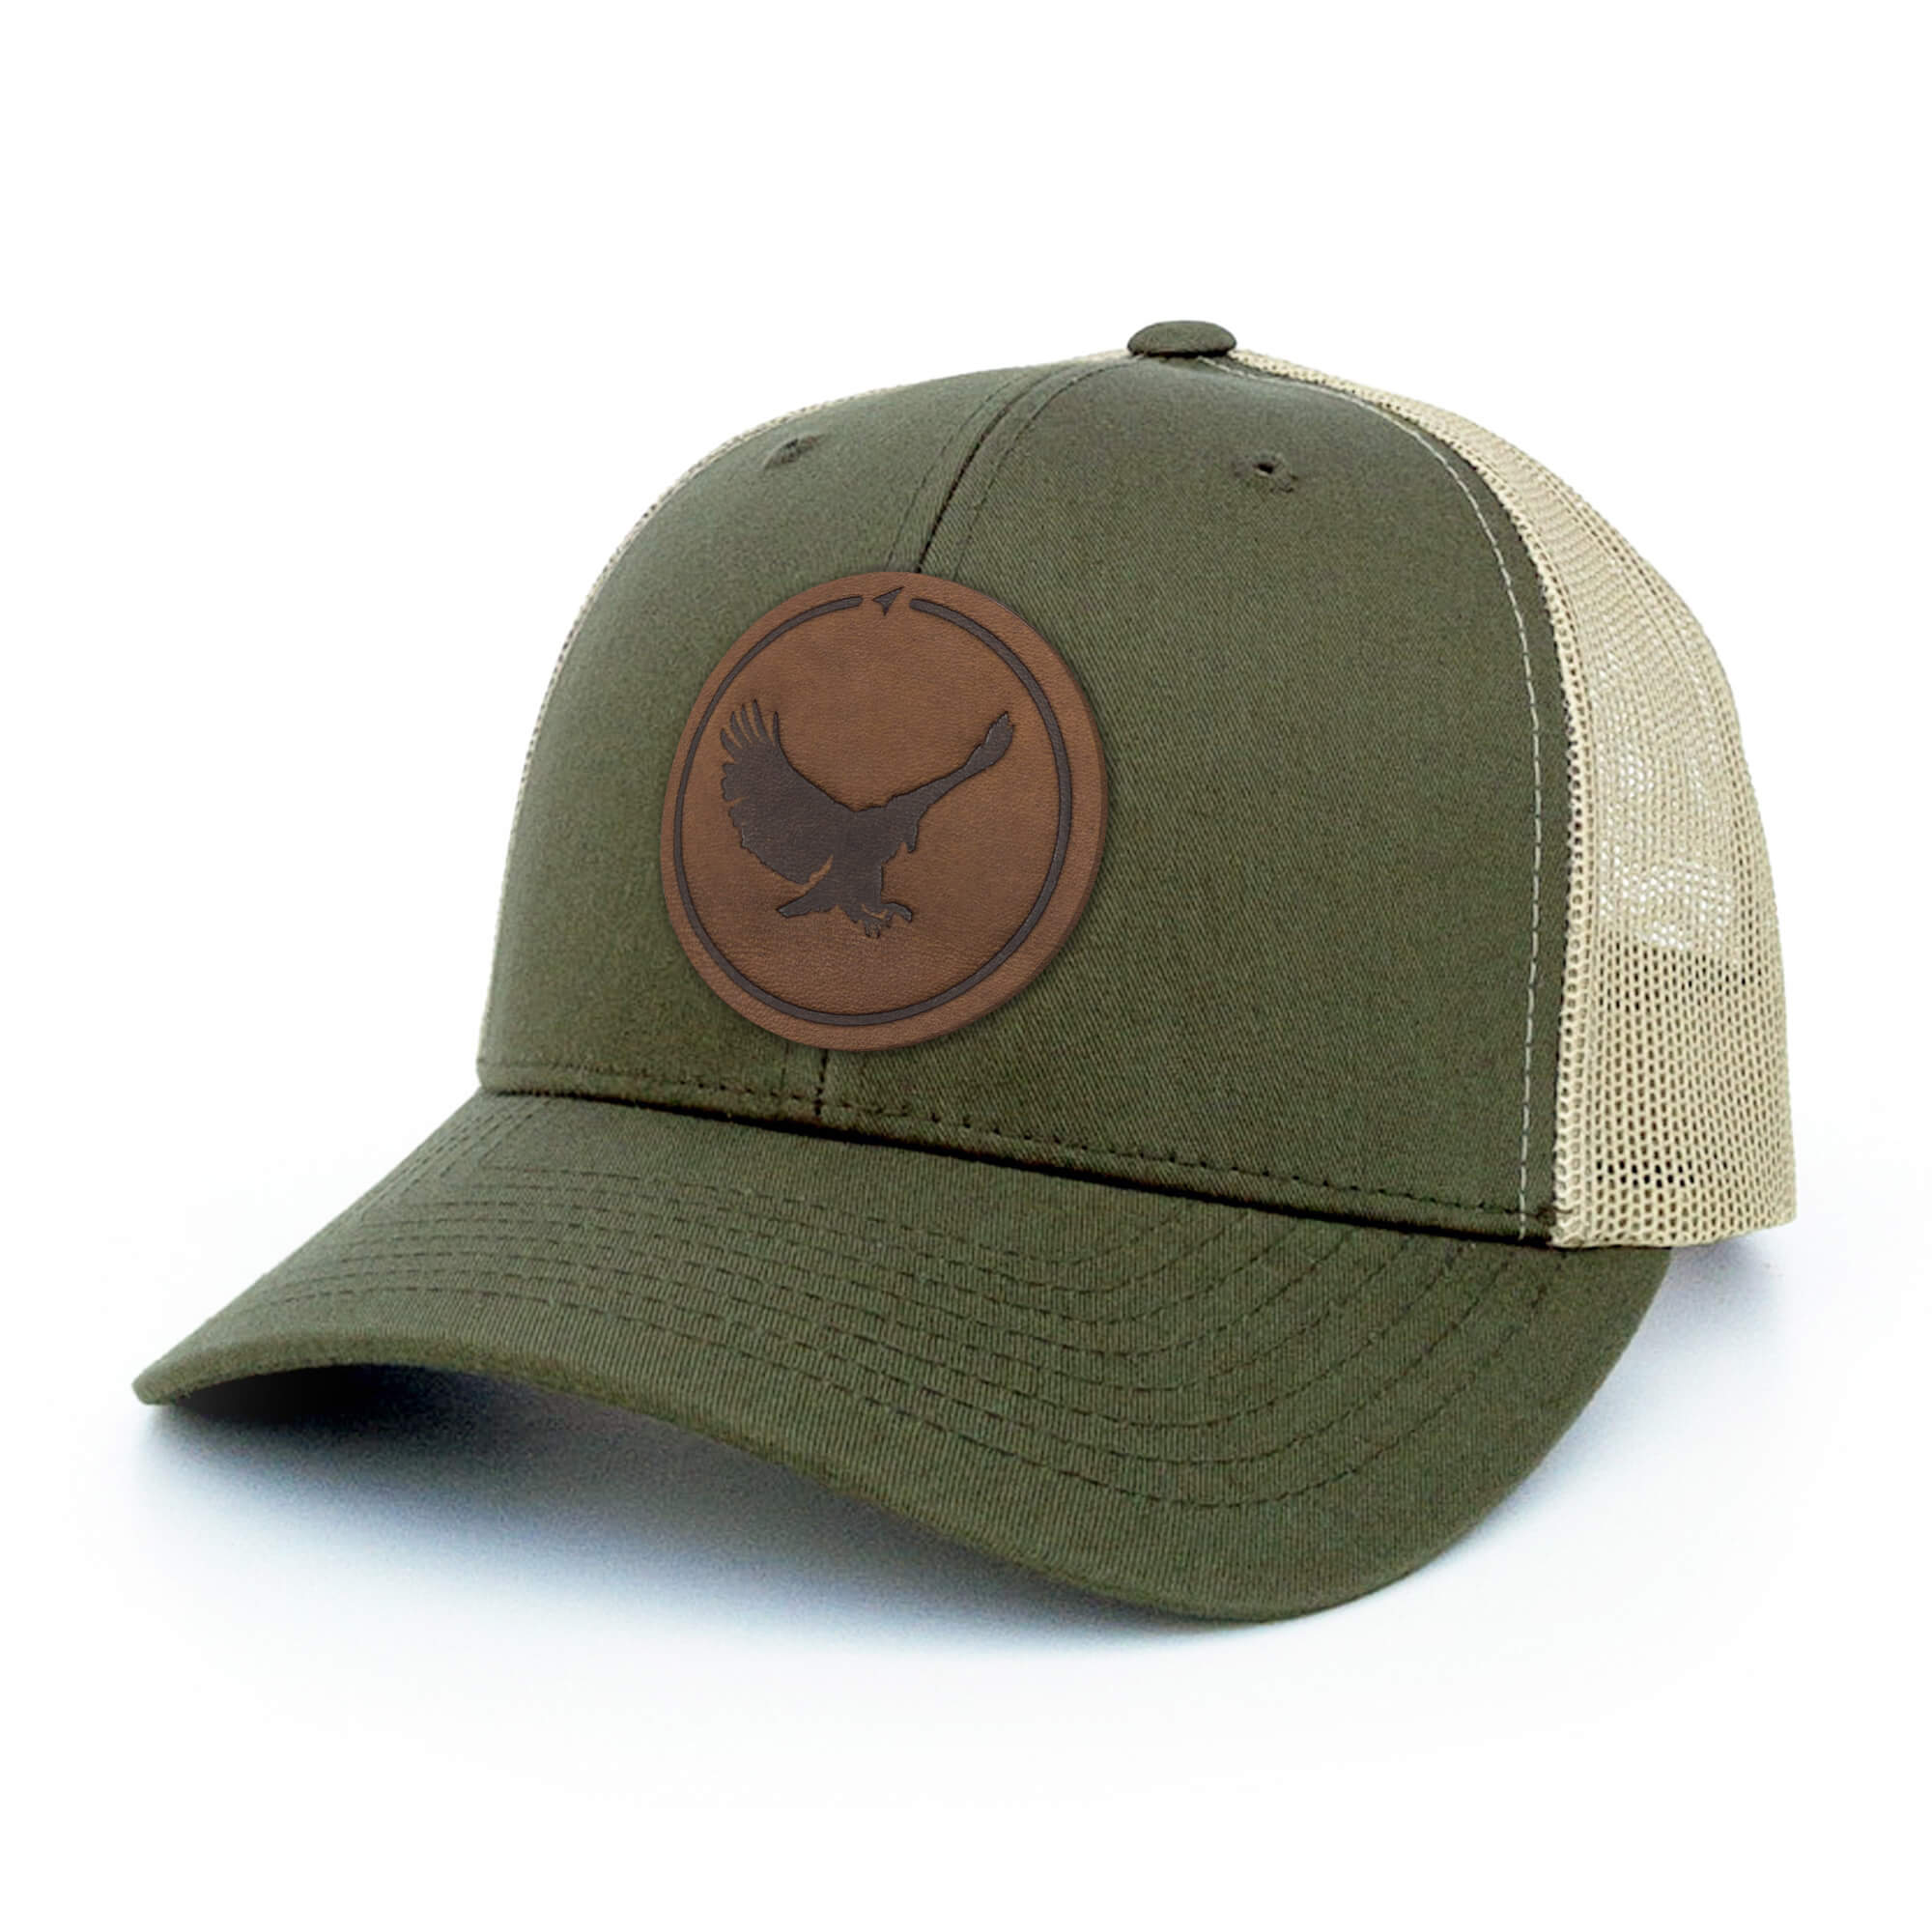 Moss Green and khaki trucker hat with full-grain leather patch of an Eagle | BLACK-004-004, CHARC-004-004, NAVY-004-004, HGREY-004-004, MOSS-004-004, BROWN-004-004